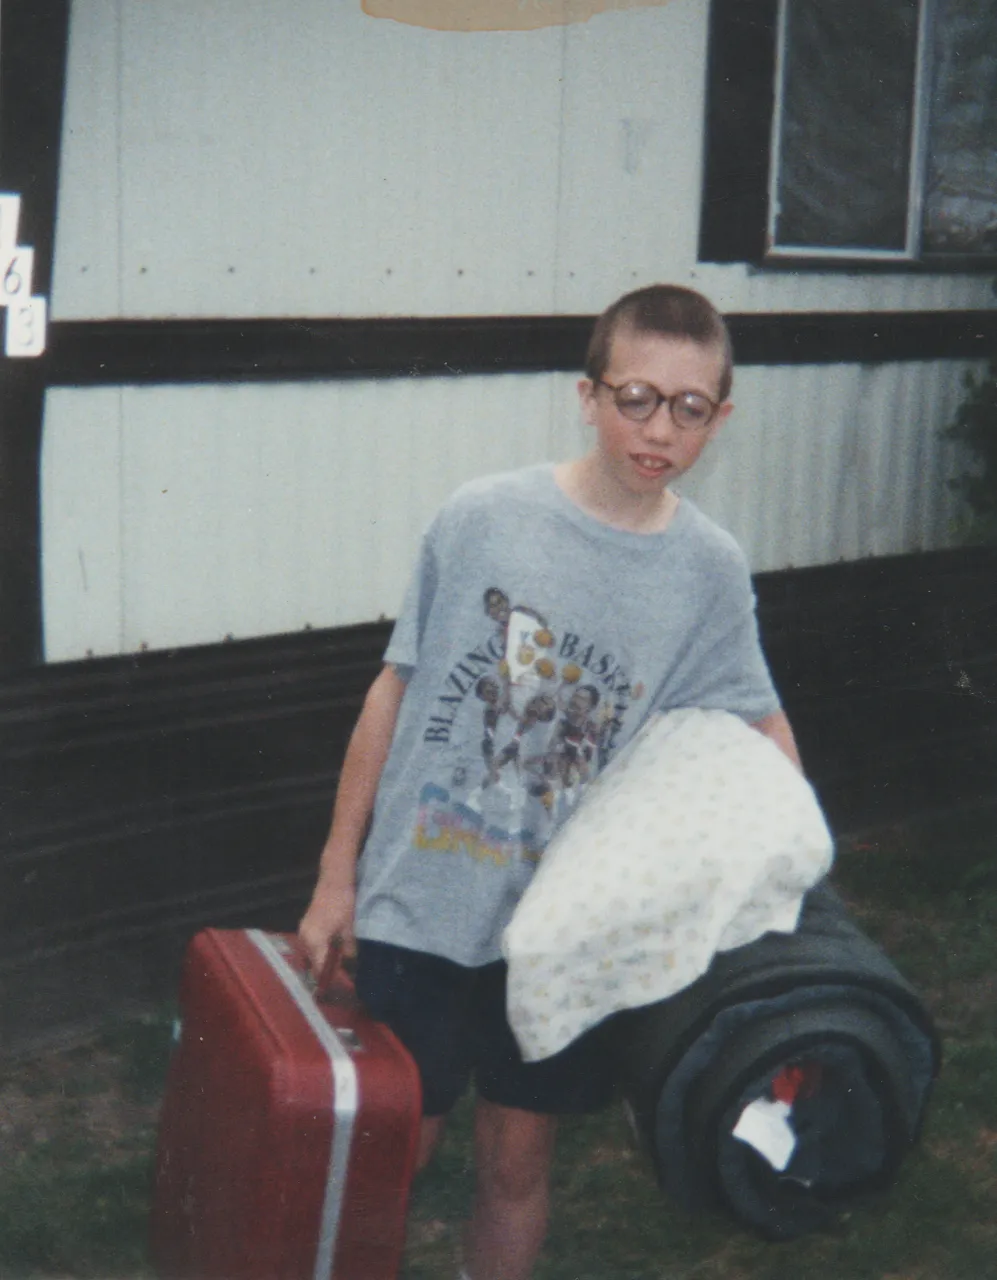 1999-07 - Joey going to WCC camp I assume, Savannah Larson, Crystal, but not totally sure what year or month-1.png